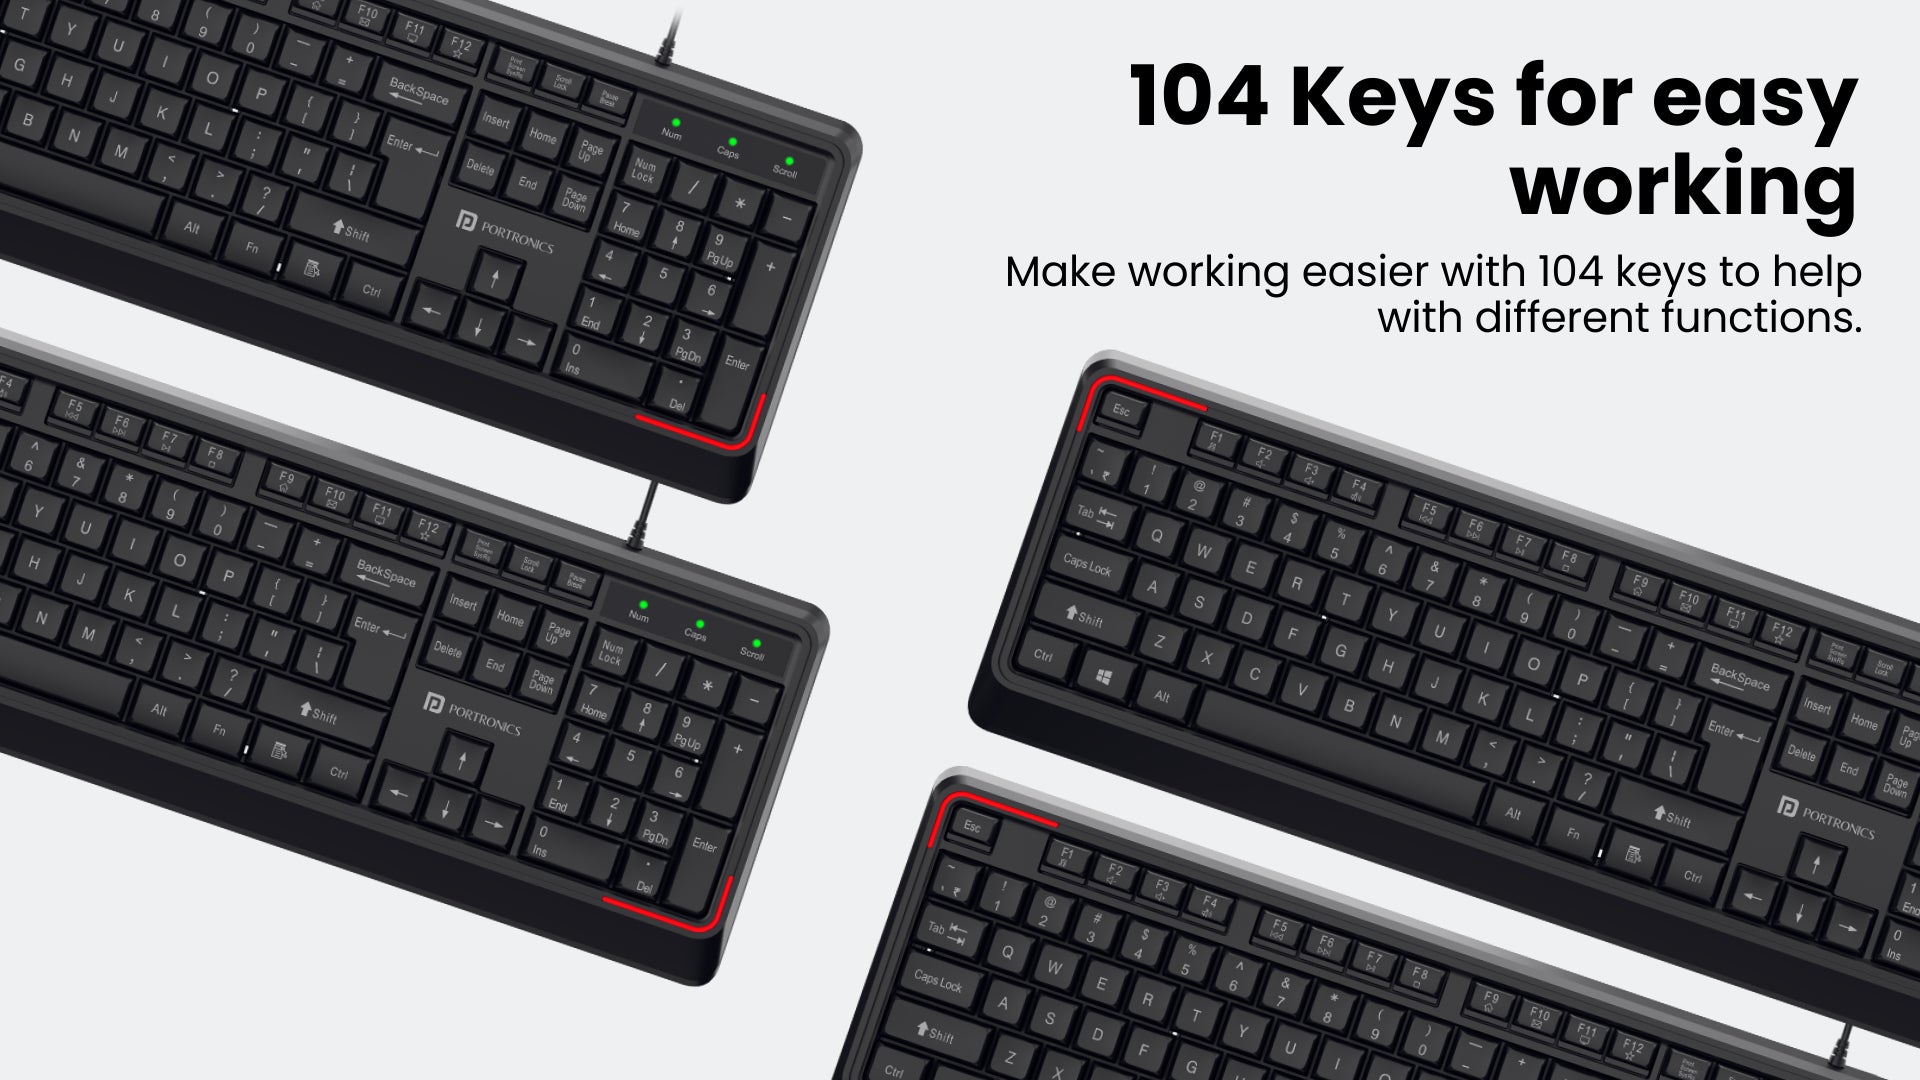 Portronics Ki-Pad wired gaming keyboard Make working easier with 104 keys to help with different functions